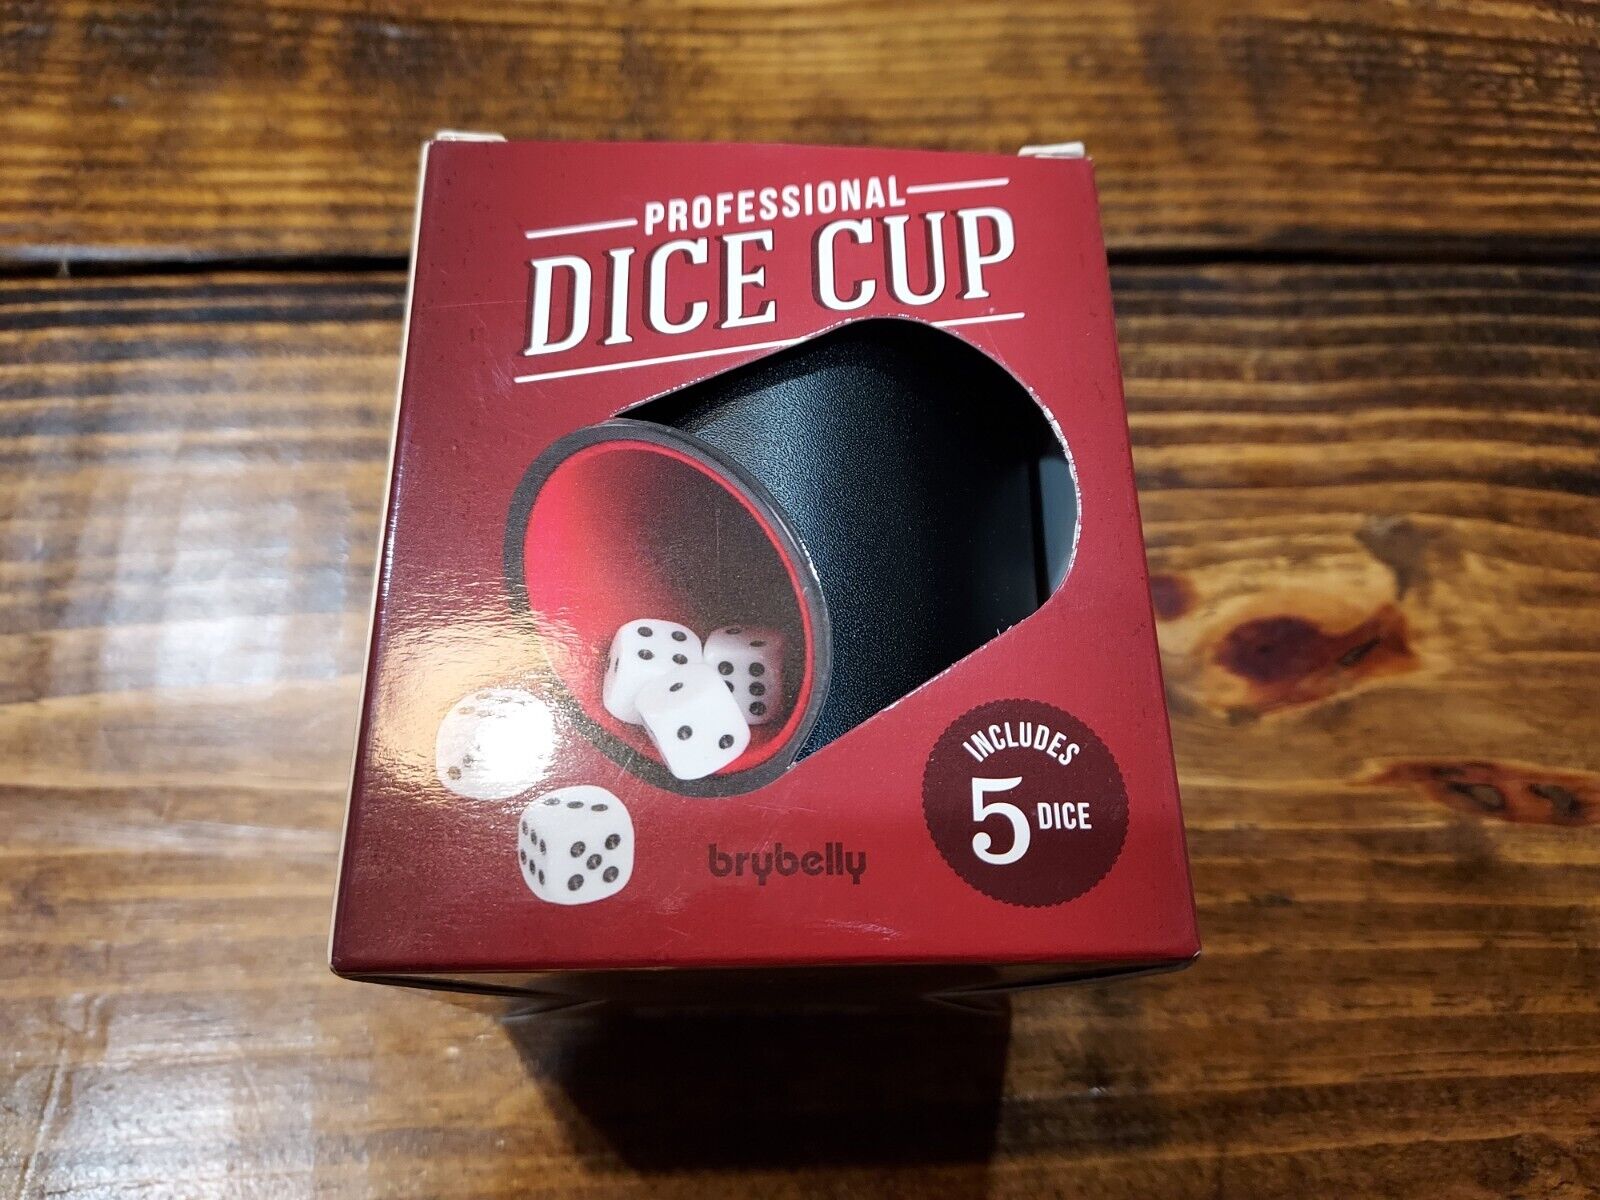 Professional Dice Cup Includes 5 Dice  New In Box 2018, By Brybelly.  Free Ship